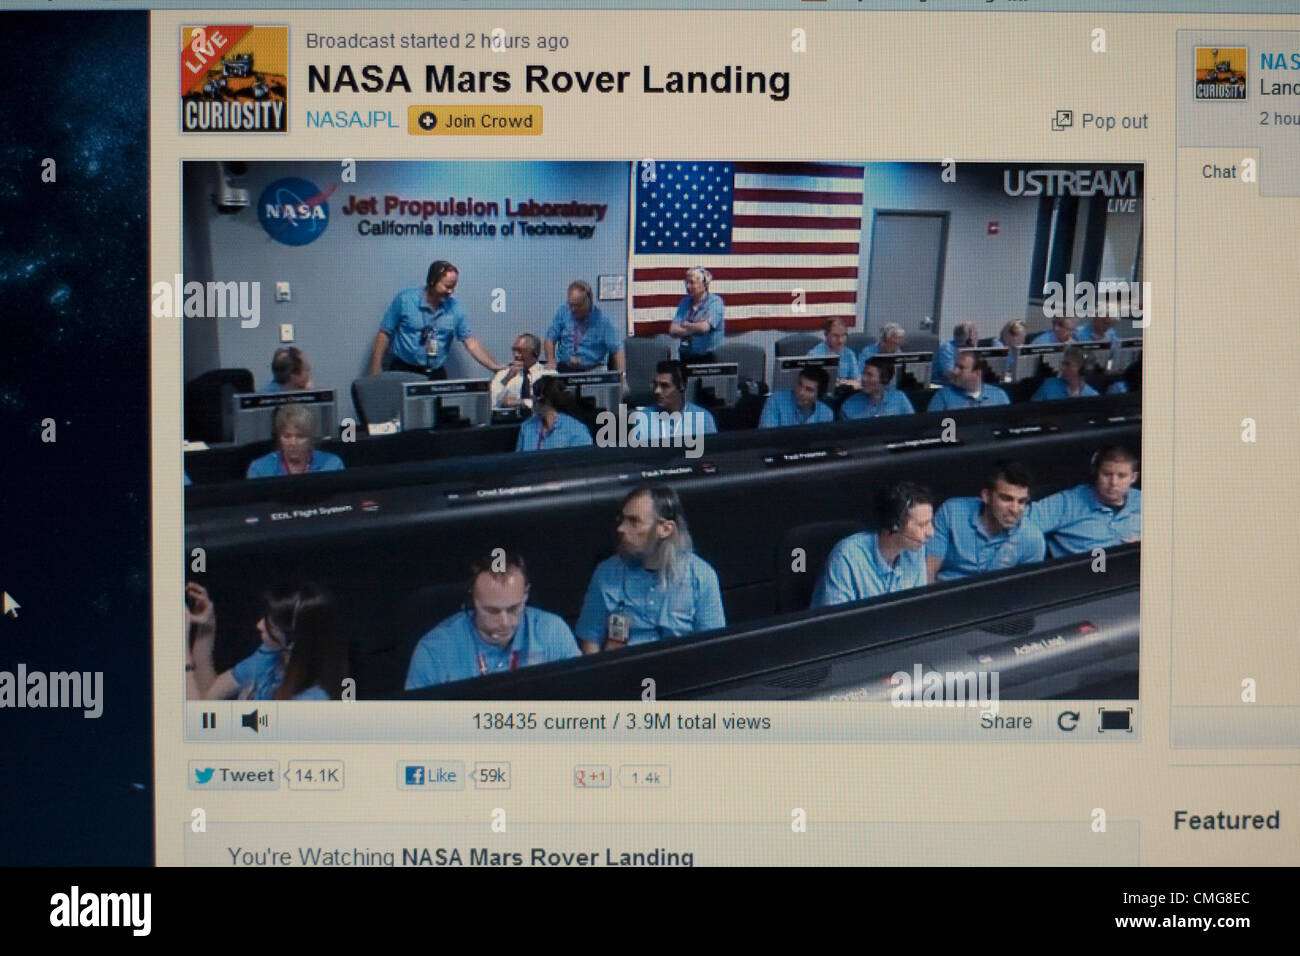 August 6th 2012. USA. Live Stream of NASA Mars Rover Landing. A computer screen view of inside the control room of the Jet Propulsion Laboratory at the California Institute of Technology in Pasadena, California minutes before the Rover Curiosity touched down on the surface of Mars. Stock Photo